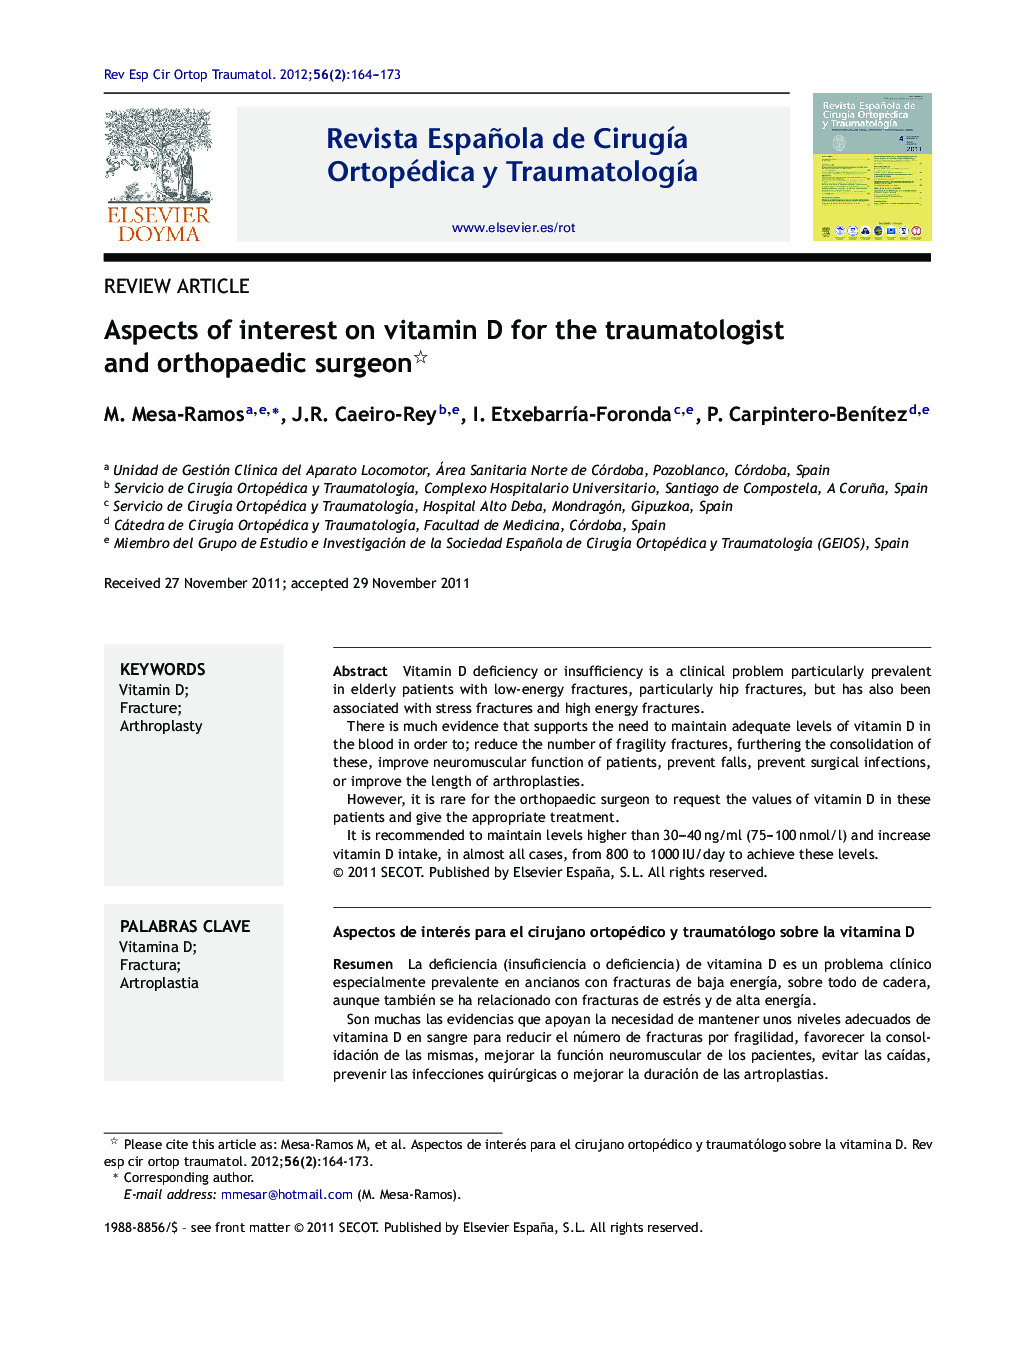 Aspects of interest on vitamin D for the traumatologist and orthopaedic surgeon